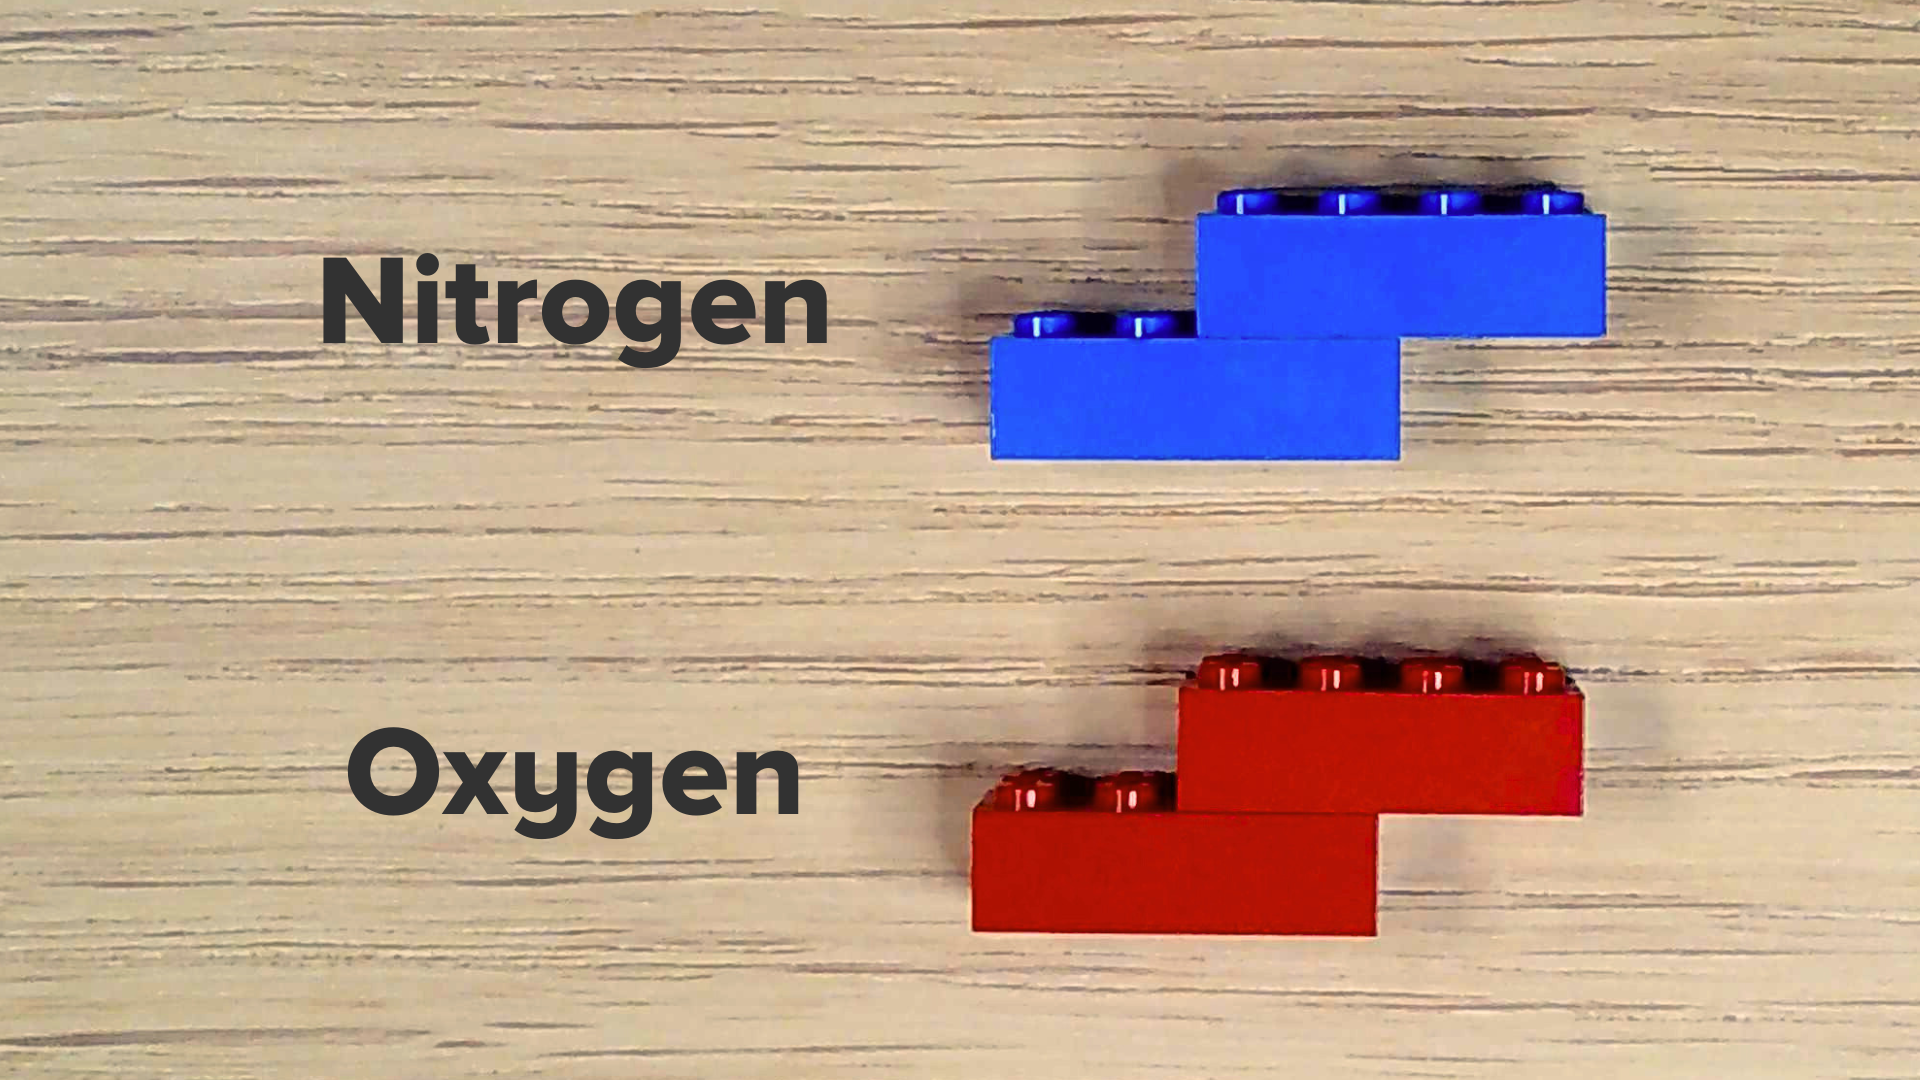 On the left, two 2x4 blue plastic construction bricks are attached in an offset manner. On the right, two red bricks are in the same formation.